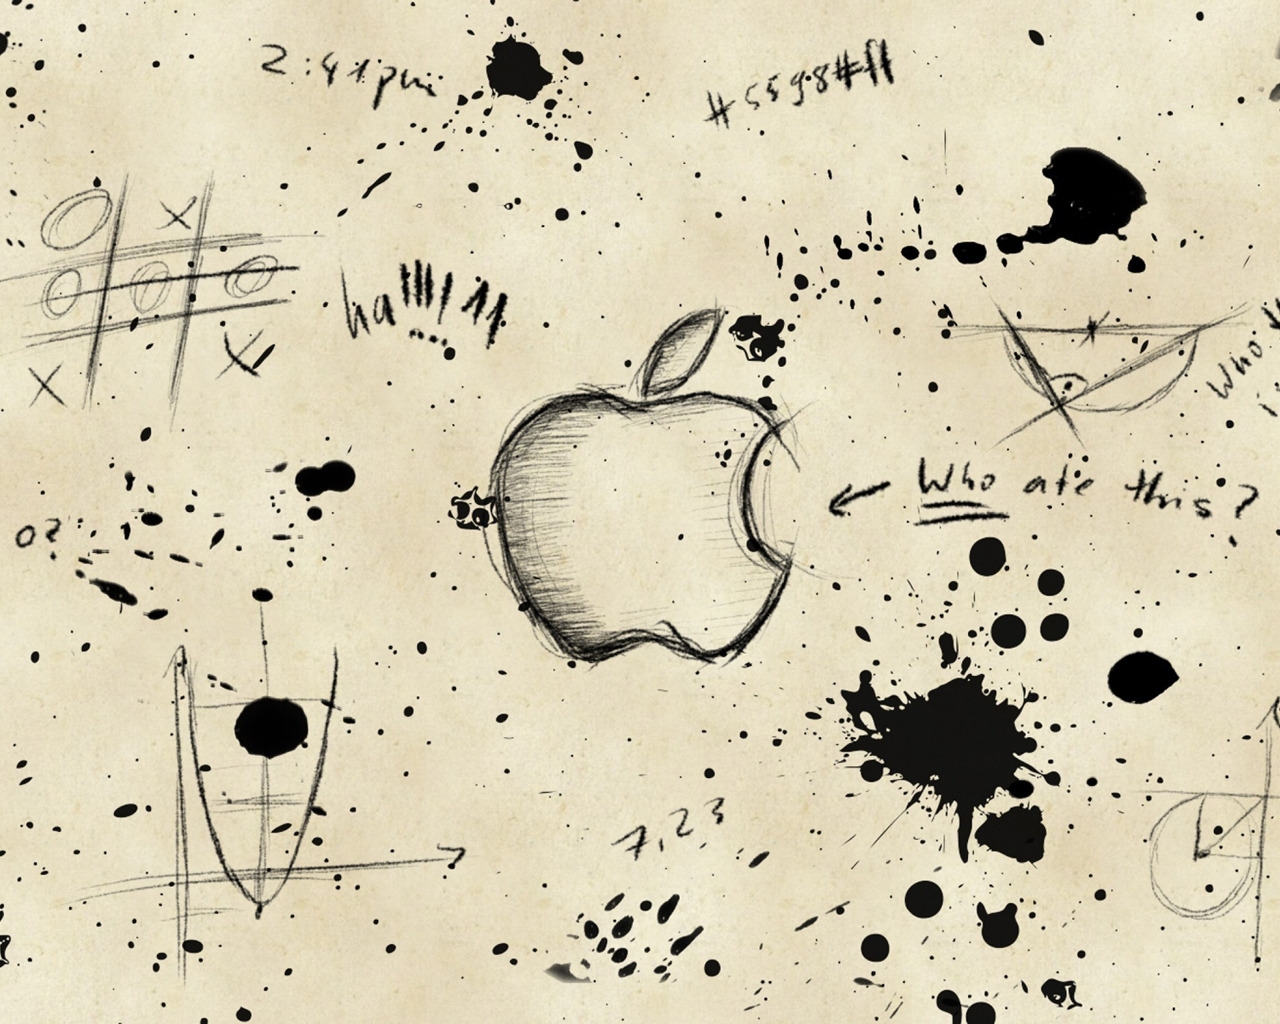 Apple Sketch for 1280 x 1024 resolution